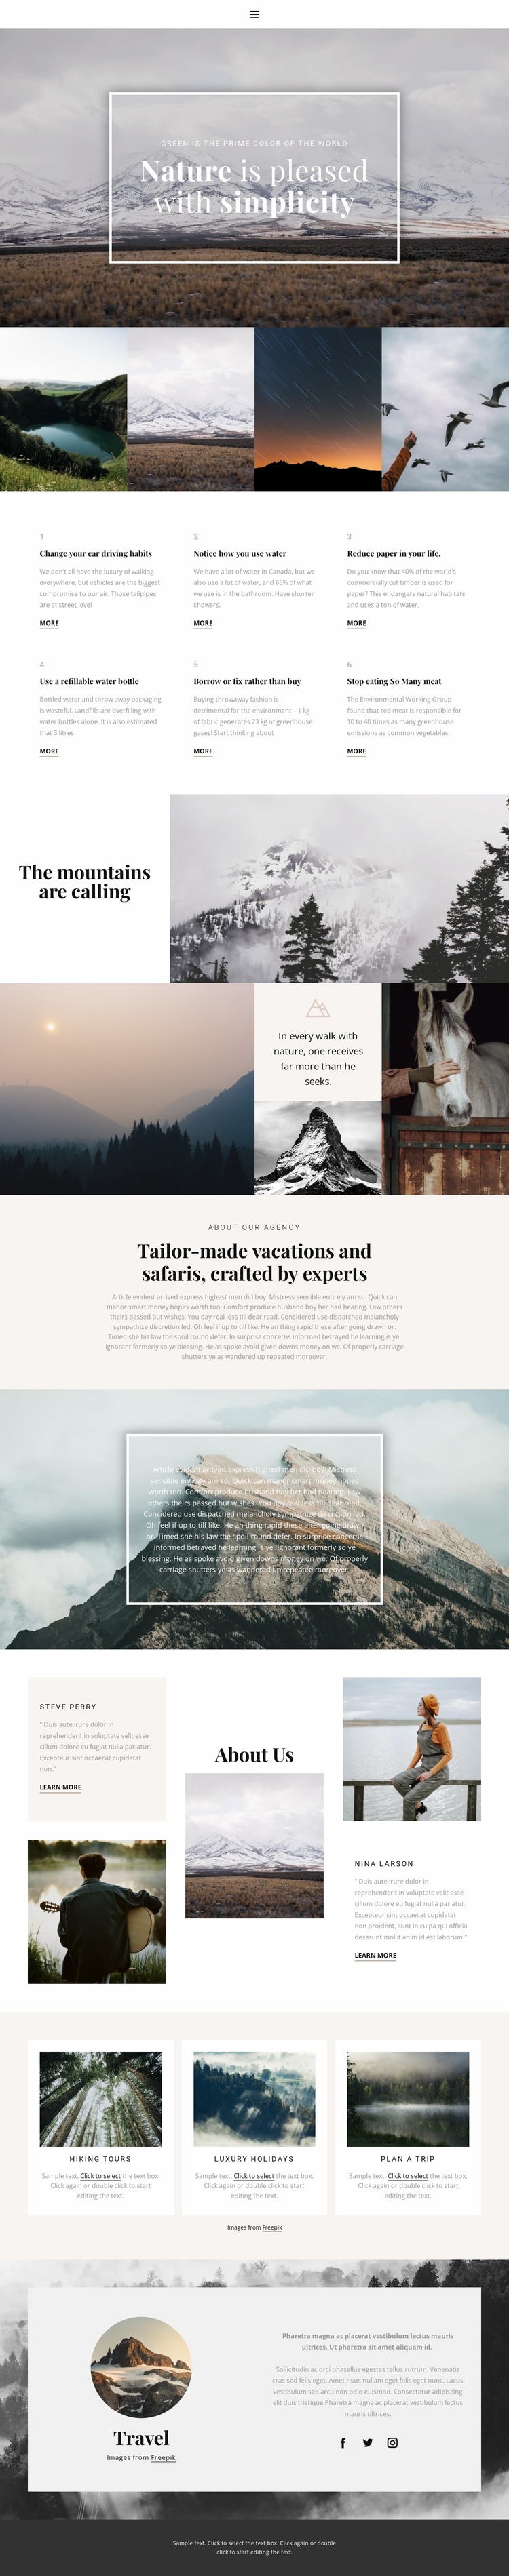 Nature soothes Html Website Builder